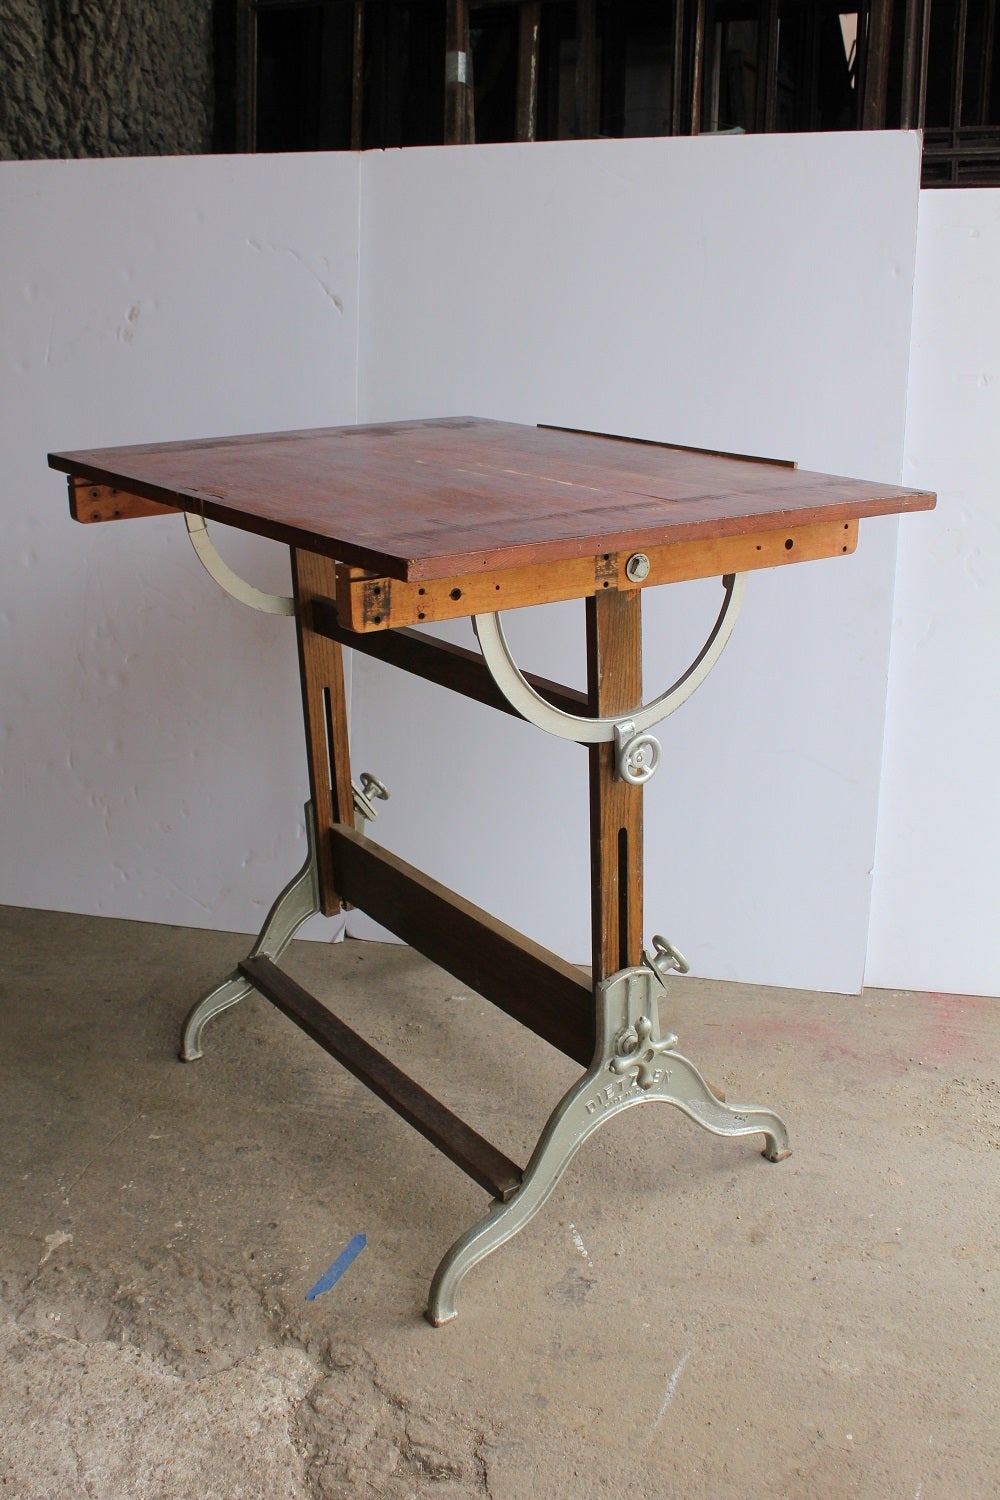 Antique American Drafting Table By Dietzgen with cast iron base.